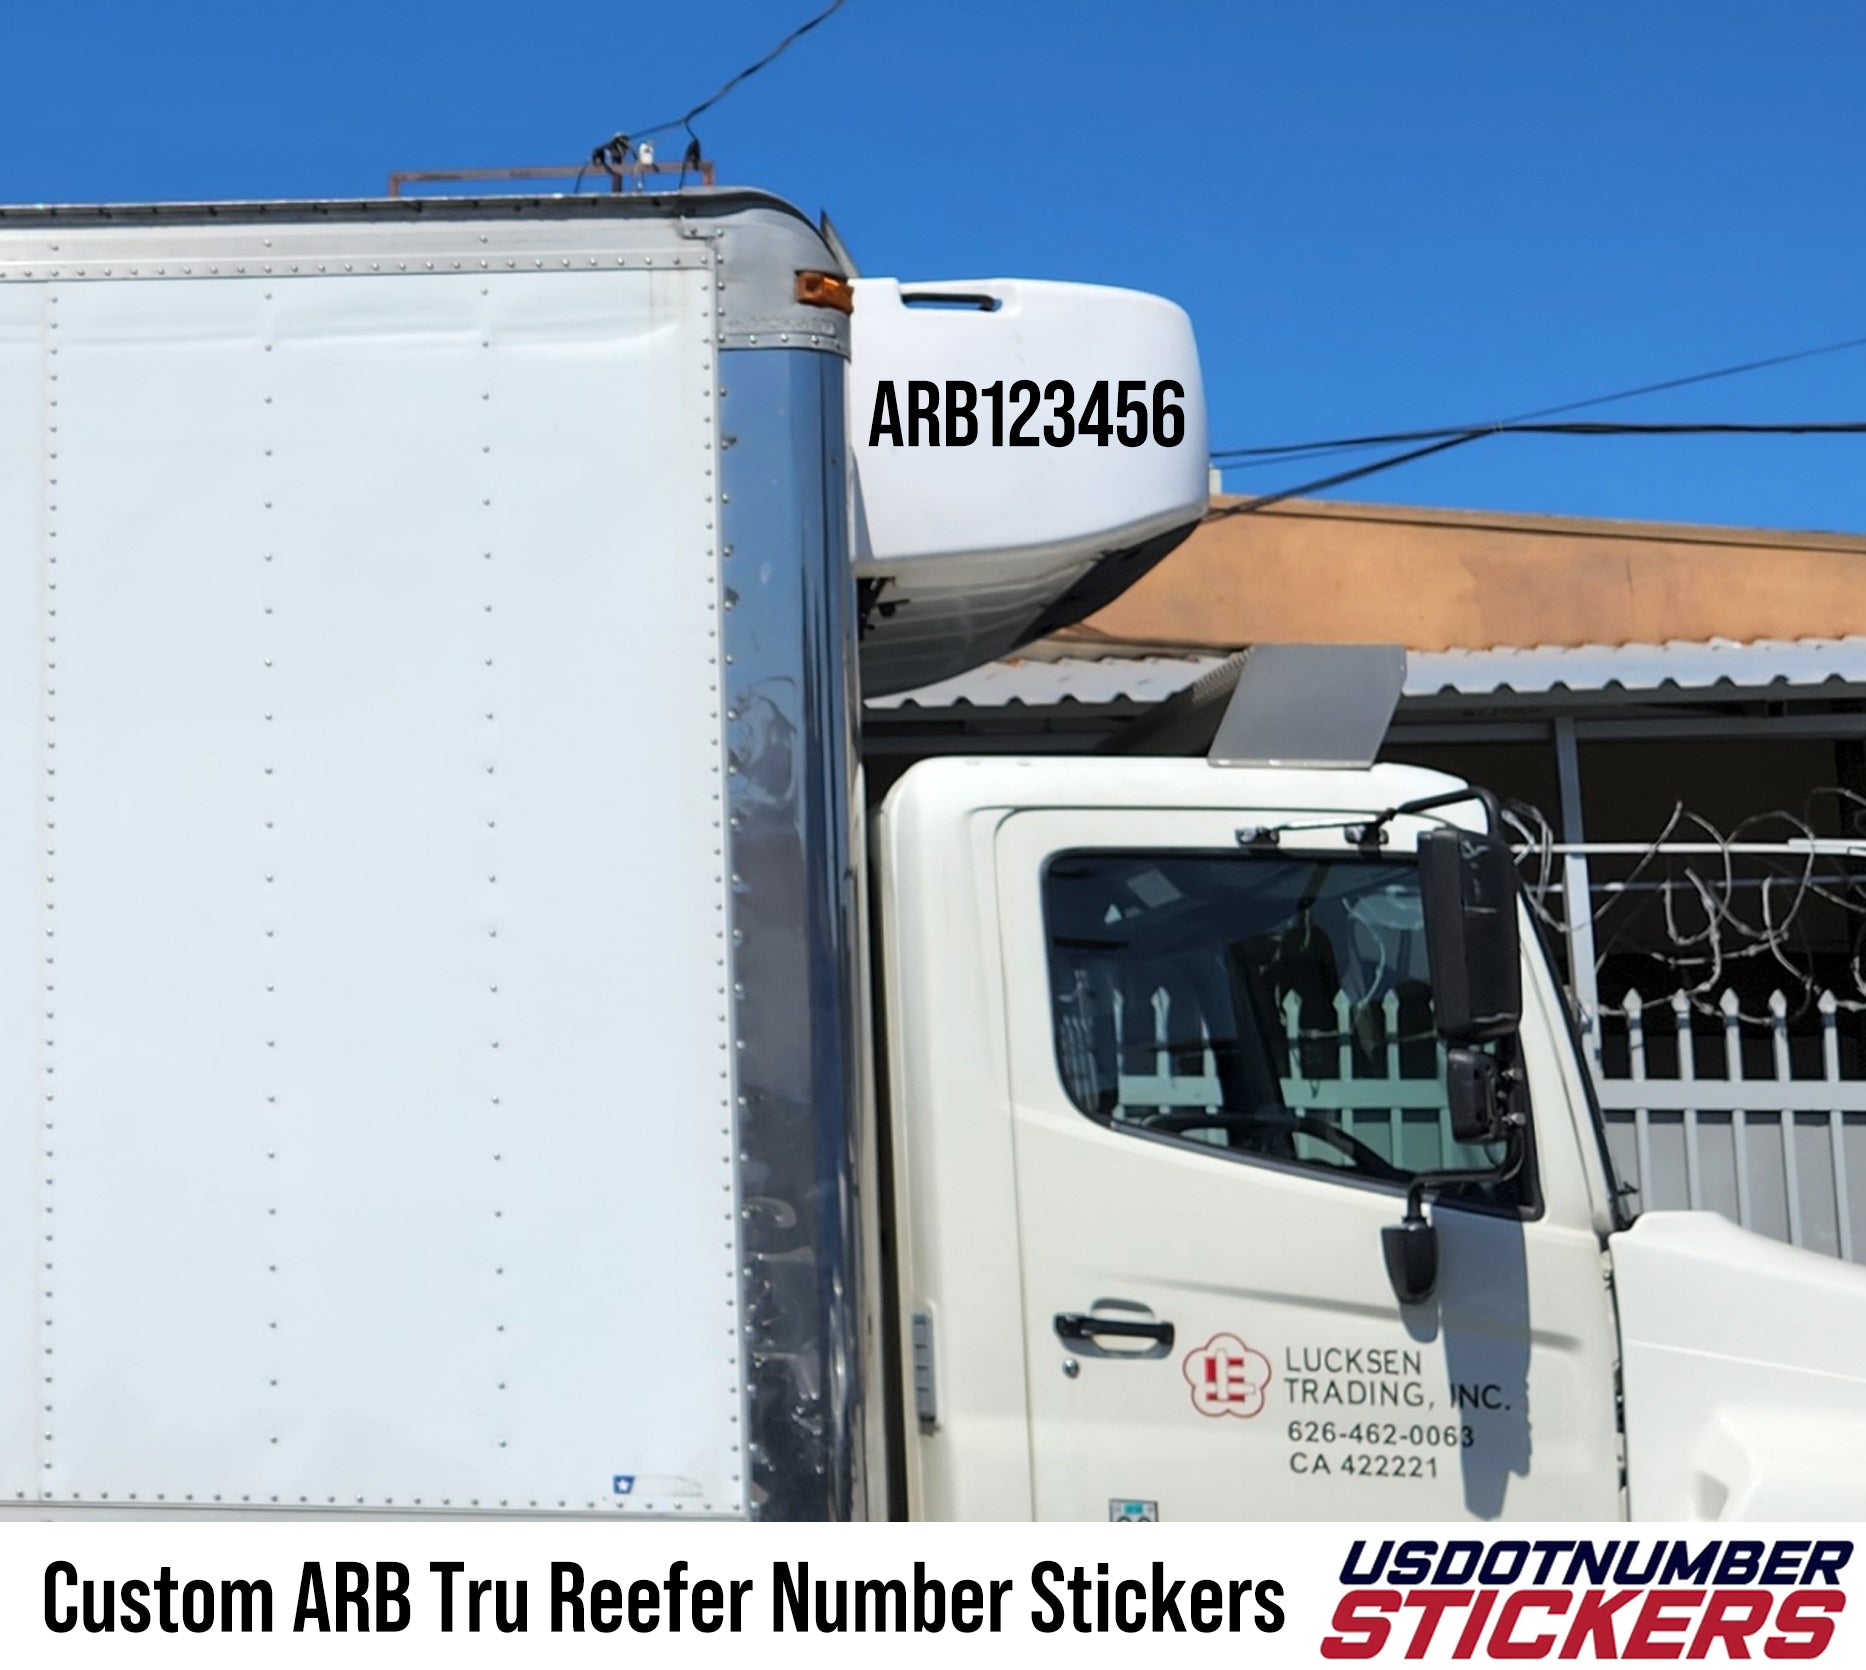 arb number on reefer decal